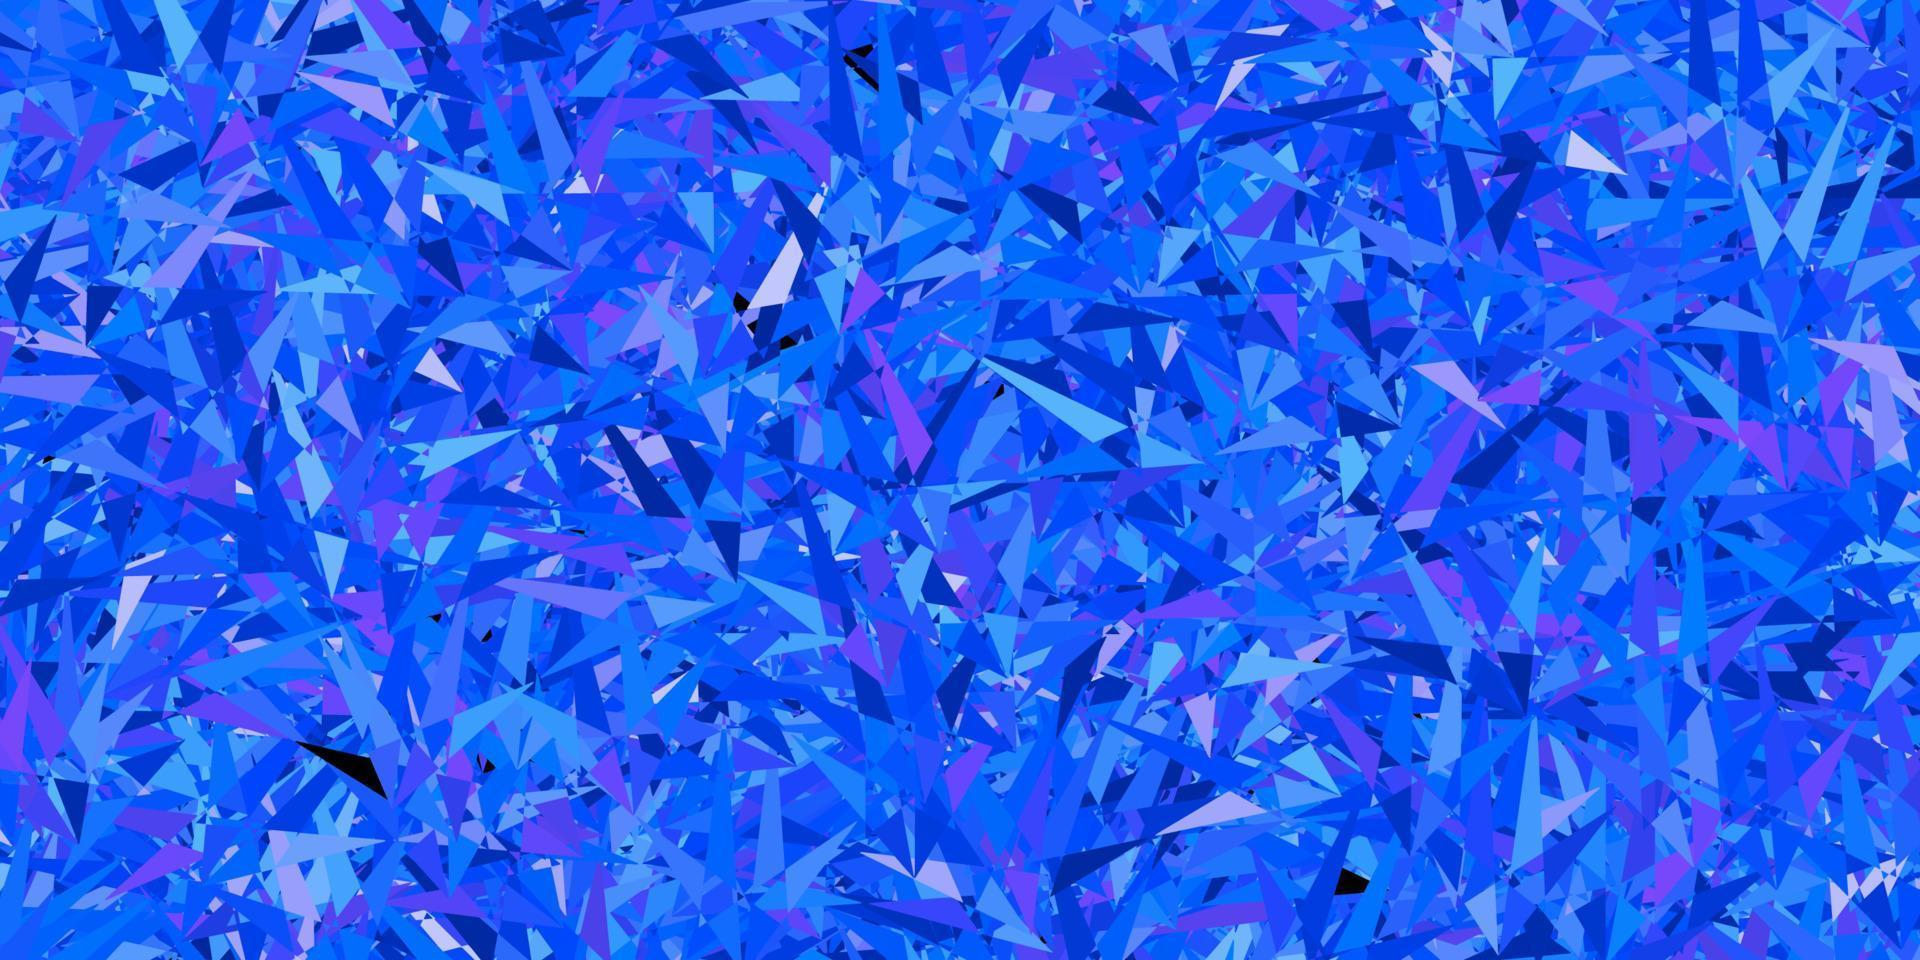 Dark Pink, Blue vector background with polygonal style.